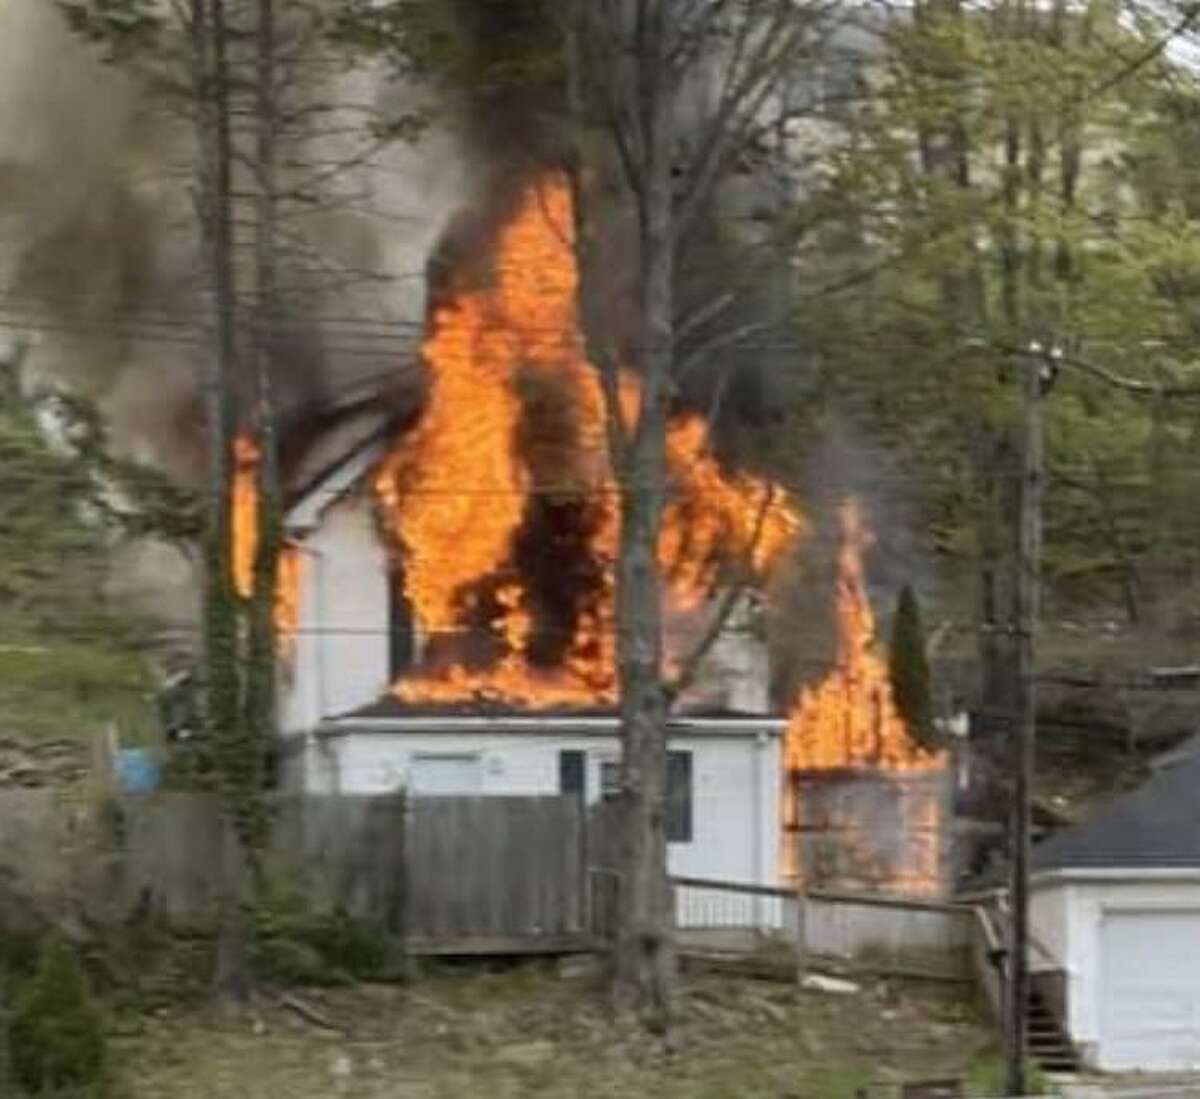 Shelton firefighters battled a blaze at a Long Hill Avenue home on Monday, May 3, 2021.